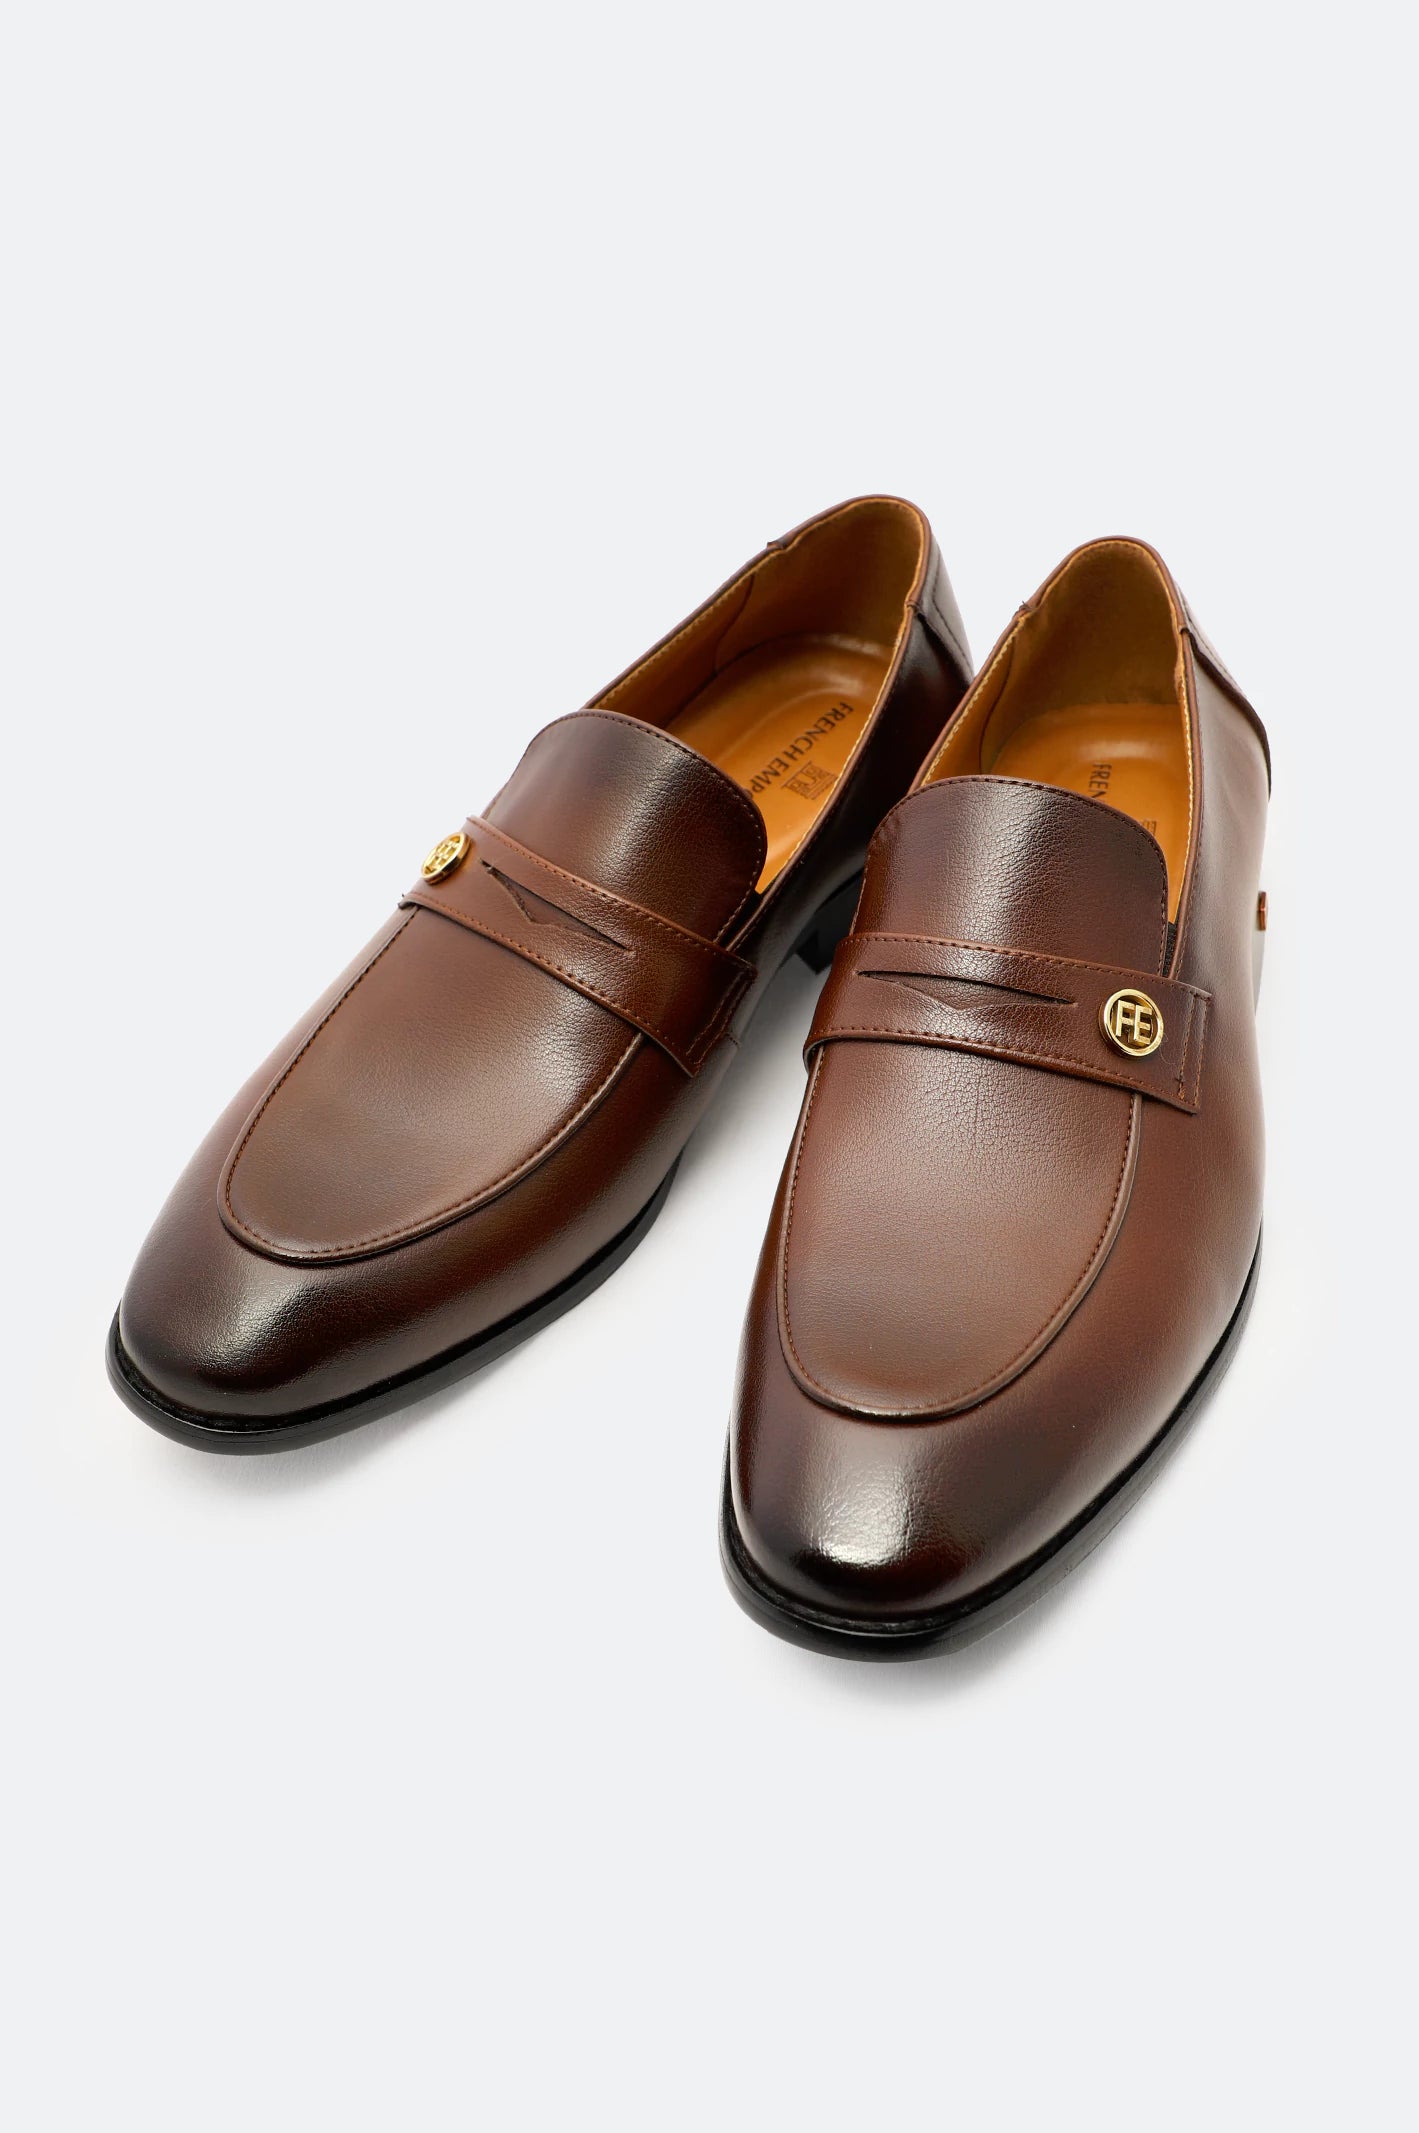 Premium Brown Formal Shoes From Diners